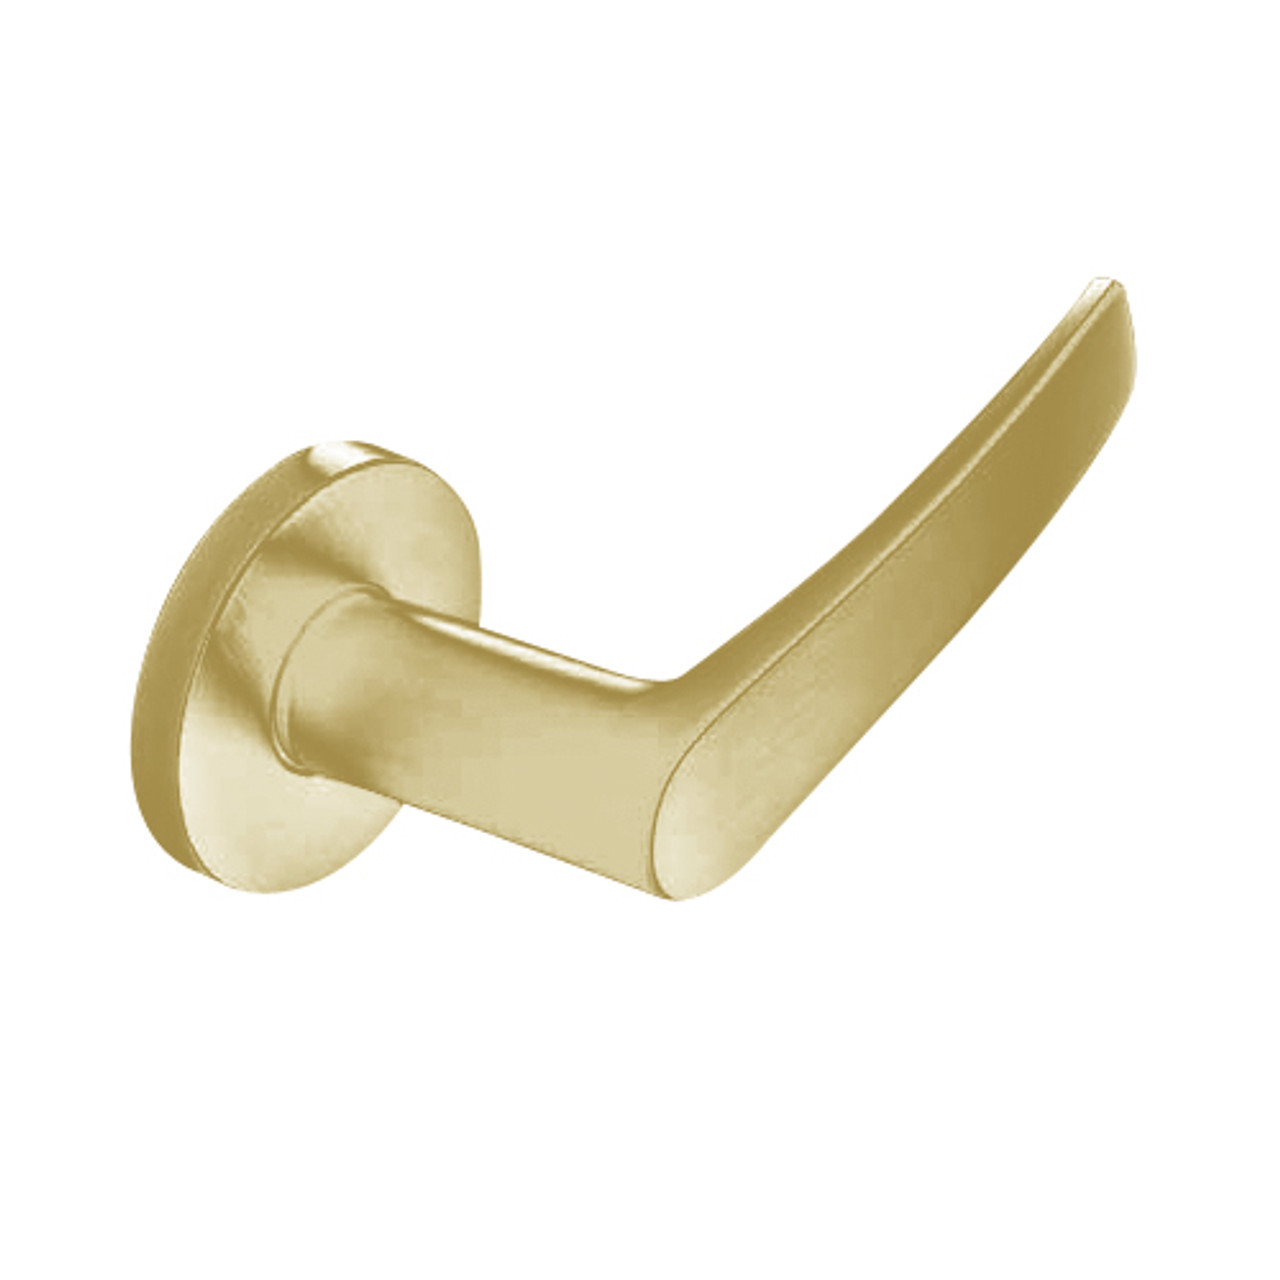 ML2060-ASF-606 Corbin Russwin ML2000 Series Mortise Privacy Locksets with Armstrong Lever in Satin Brass